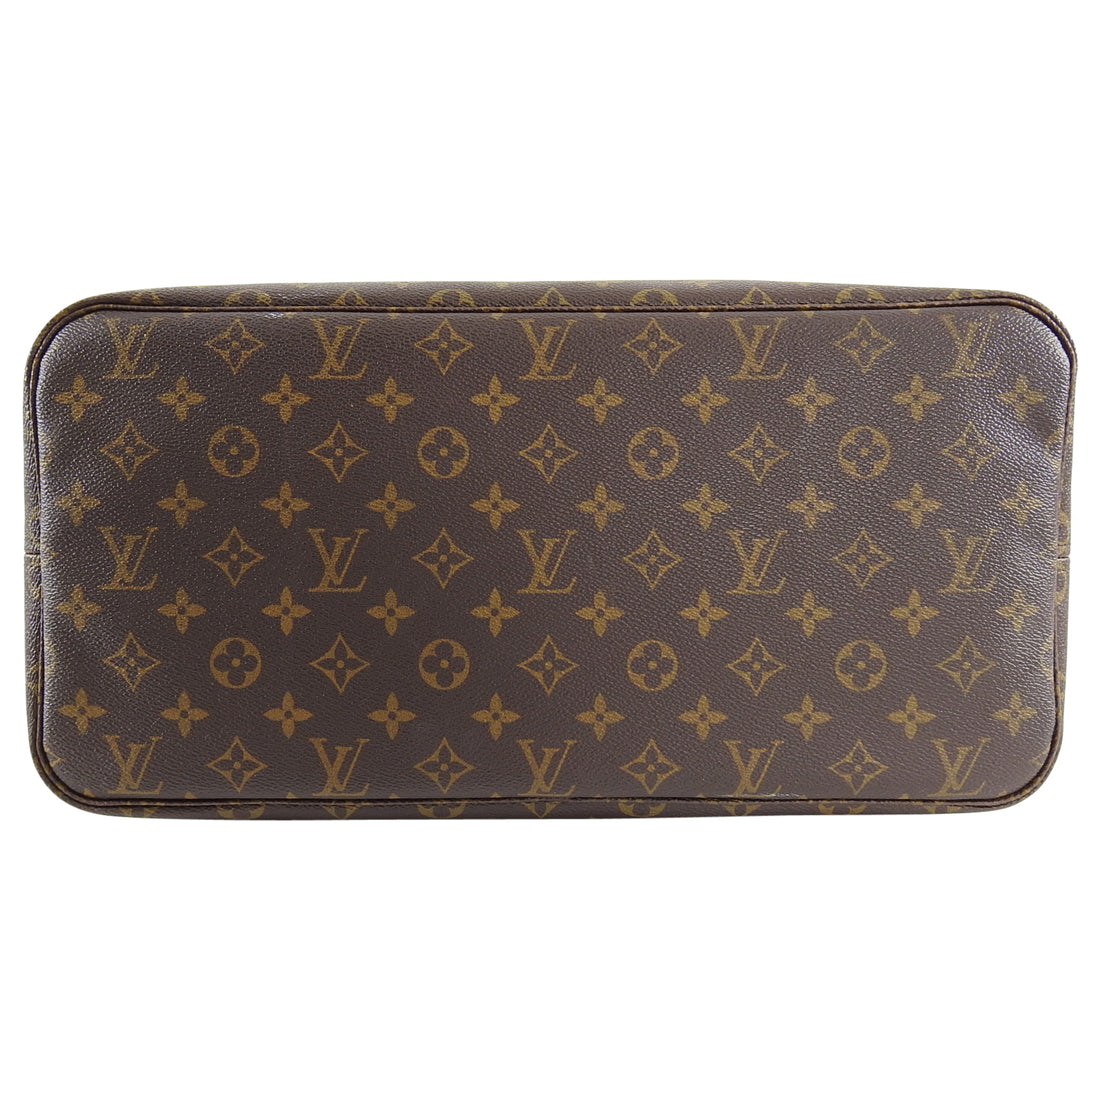 LOUIS VUITTON Neverfull GM (old) tote bag M 40157｜Product Code